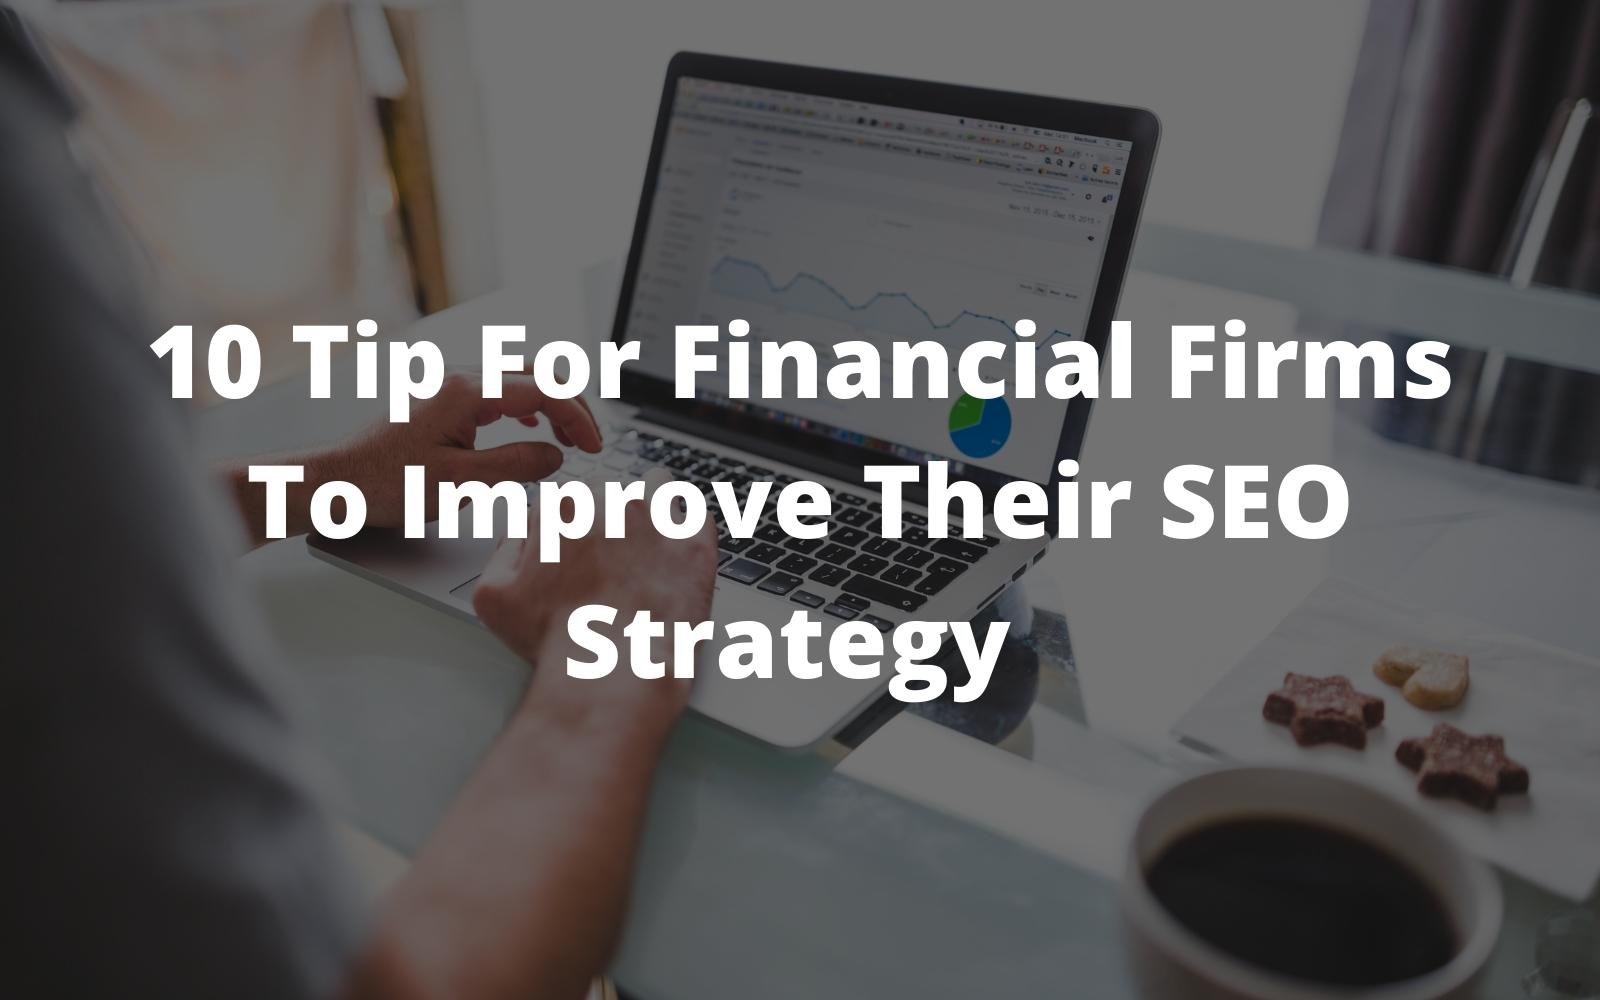 10 Tip For Financial Firms To Improve Their SEO Strategy